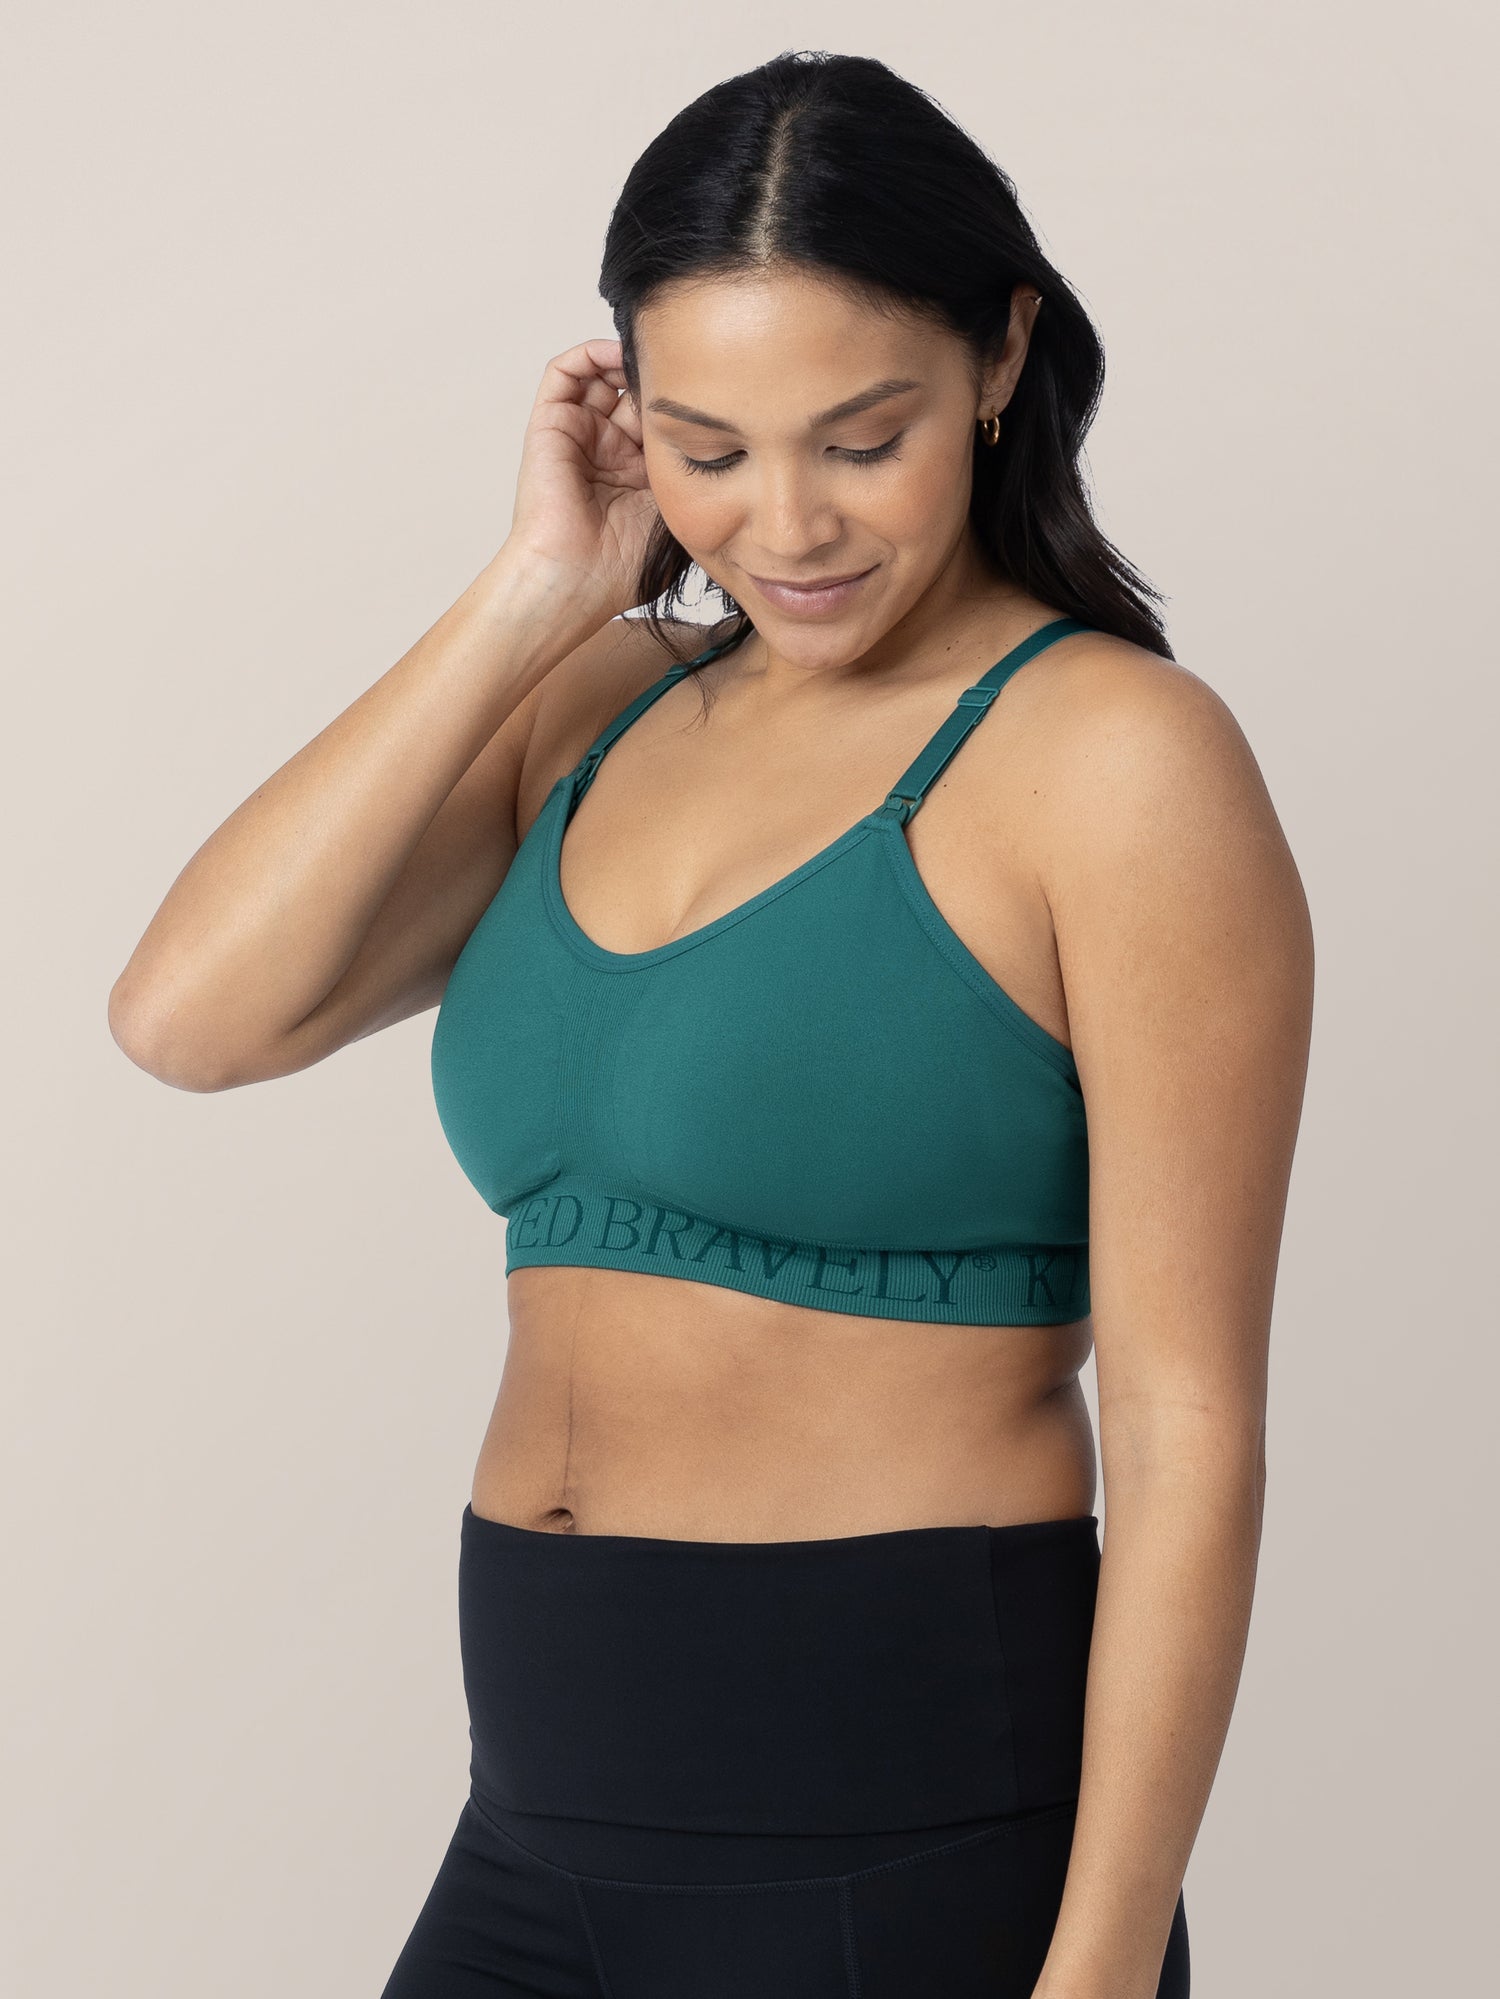 Model tucking her hair behind her ear while wearing the Sublime® Hands-Free Pumping & Nursing Sports Bra in teal.